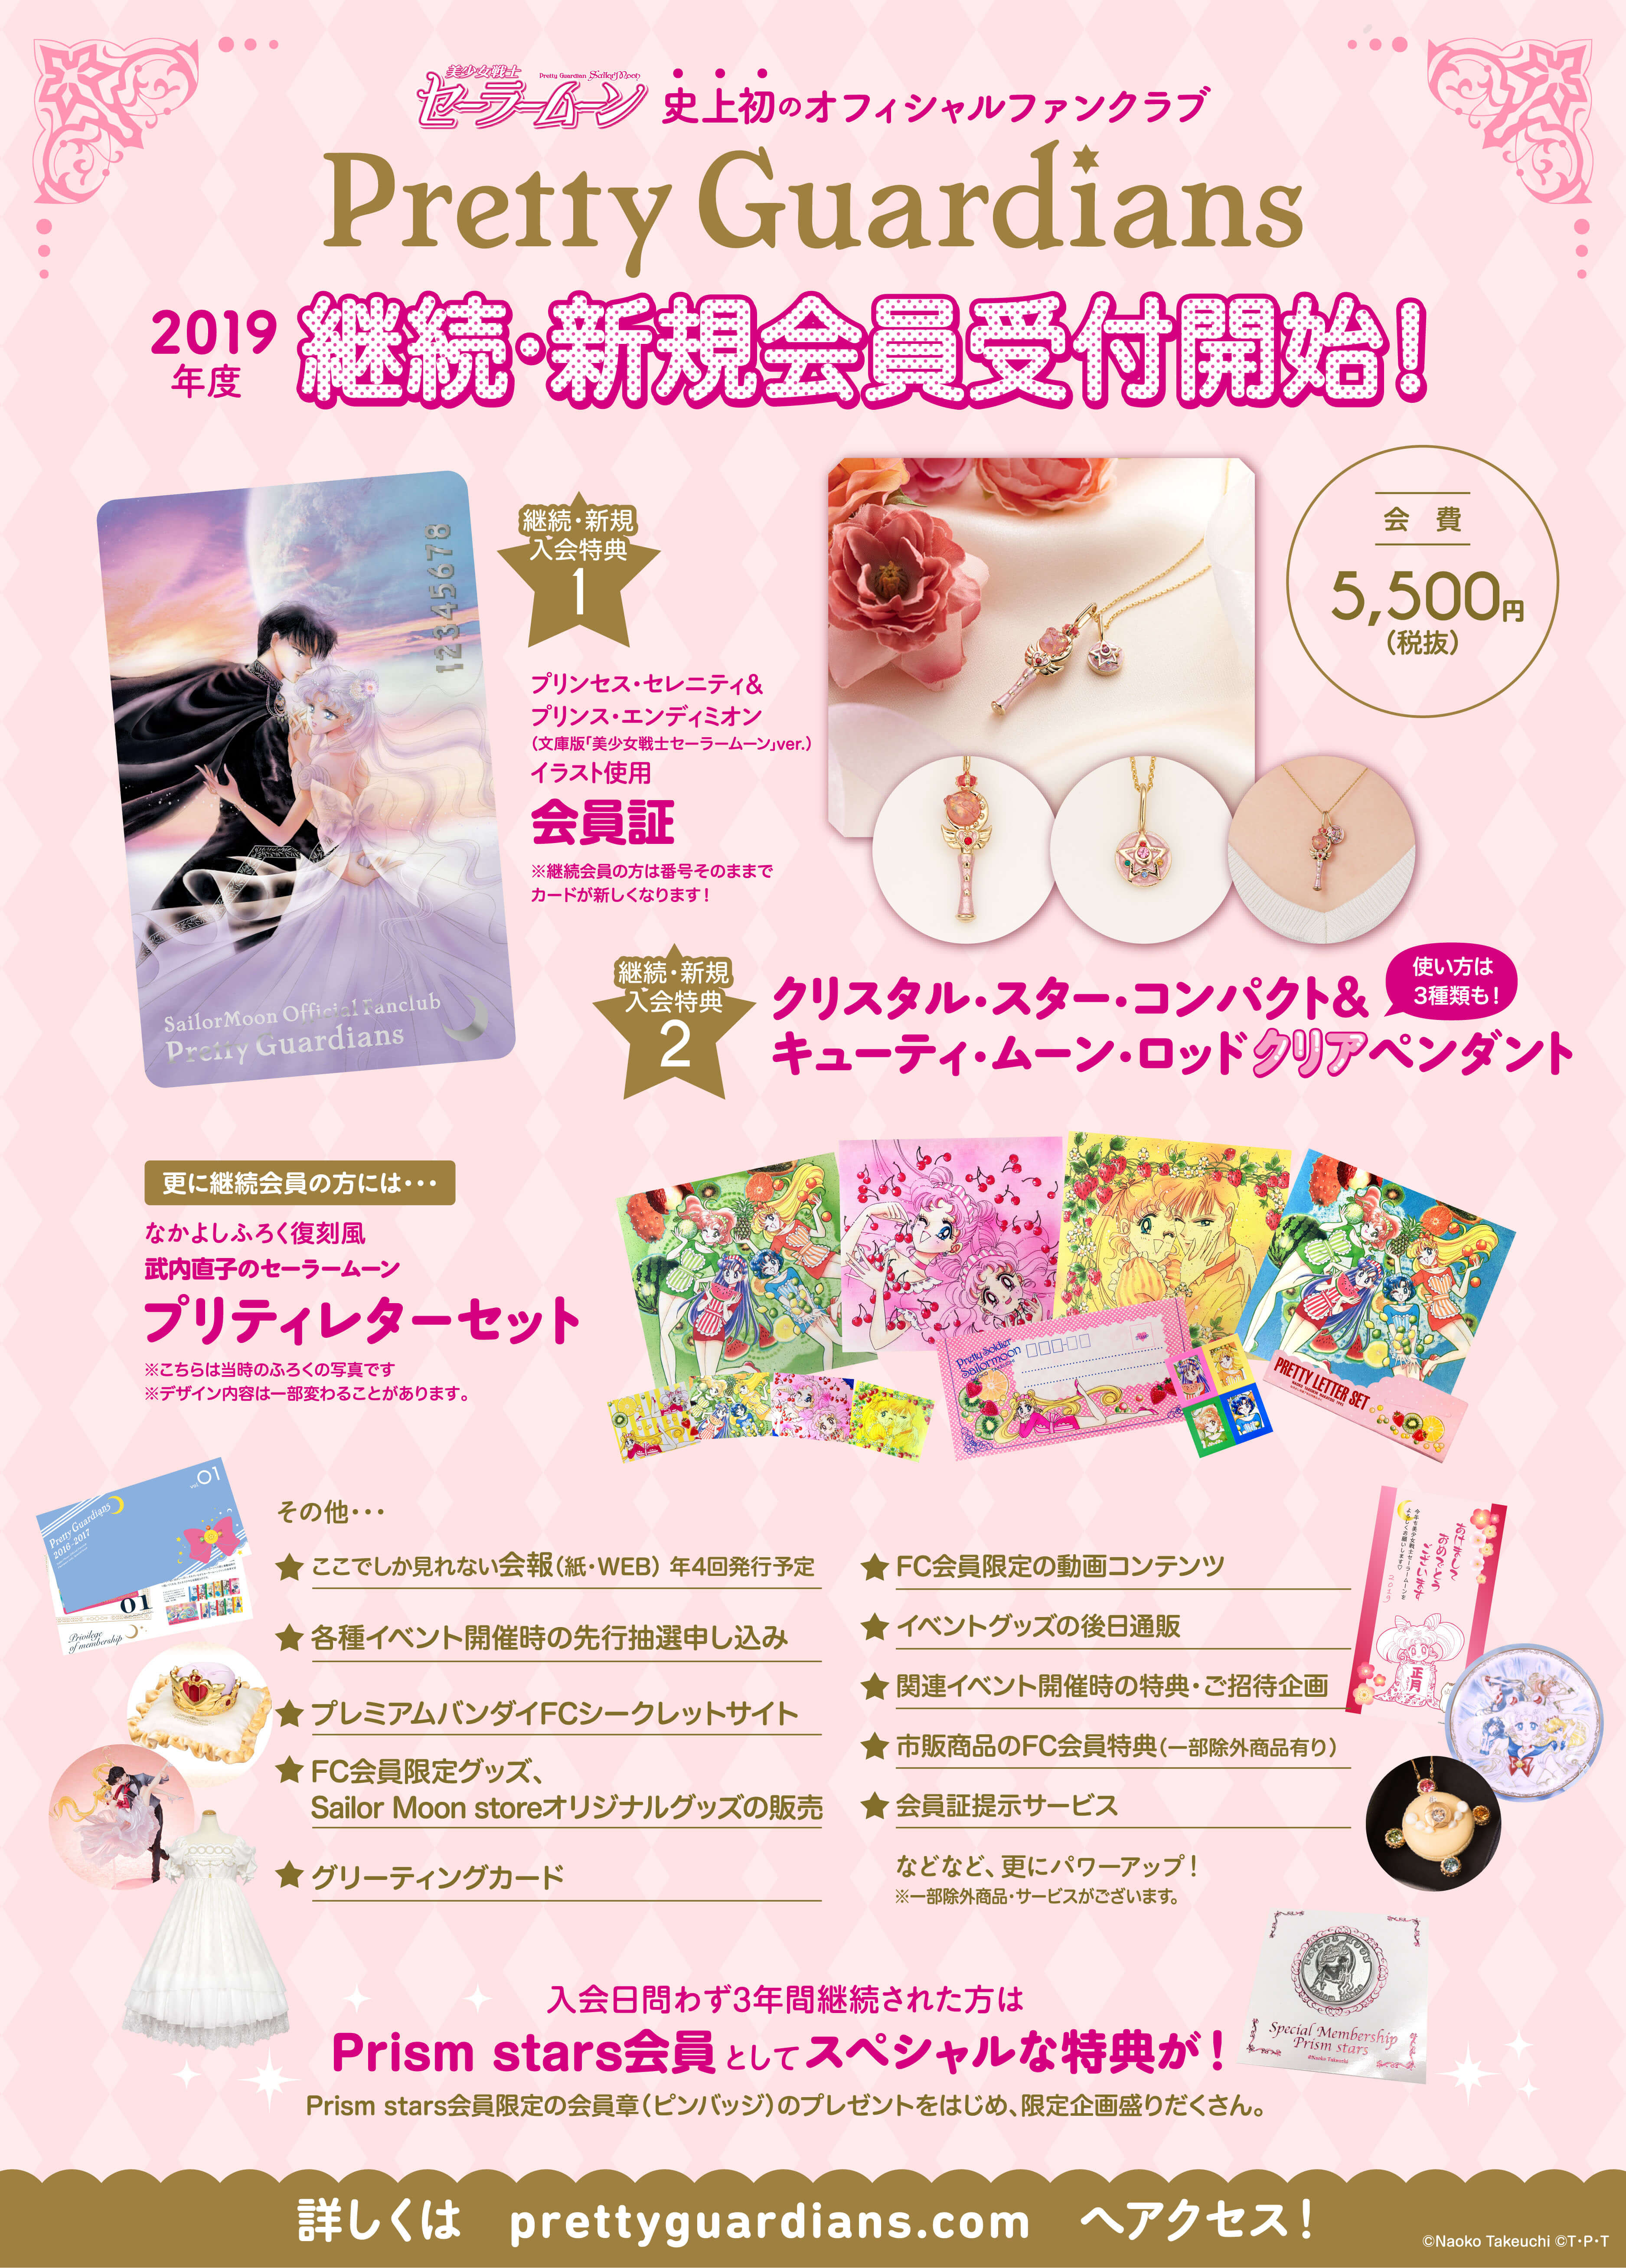 Sailor Moon: Celebrate Usagi's Birthday at Special Event in